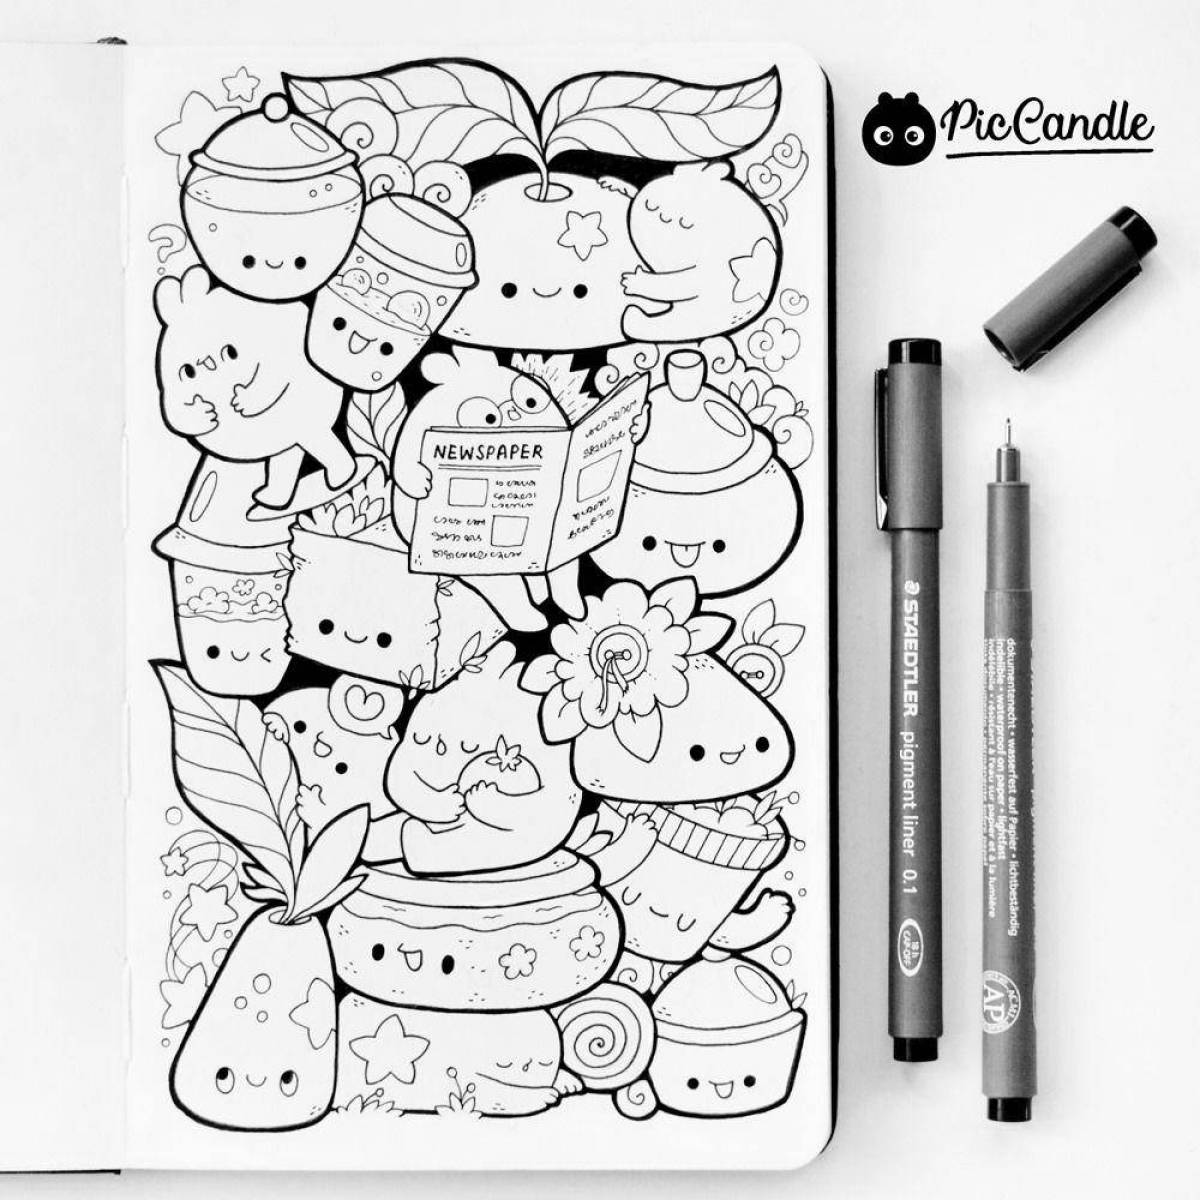 Colorful coloring book